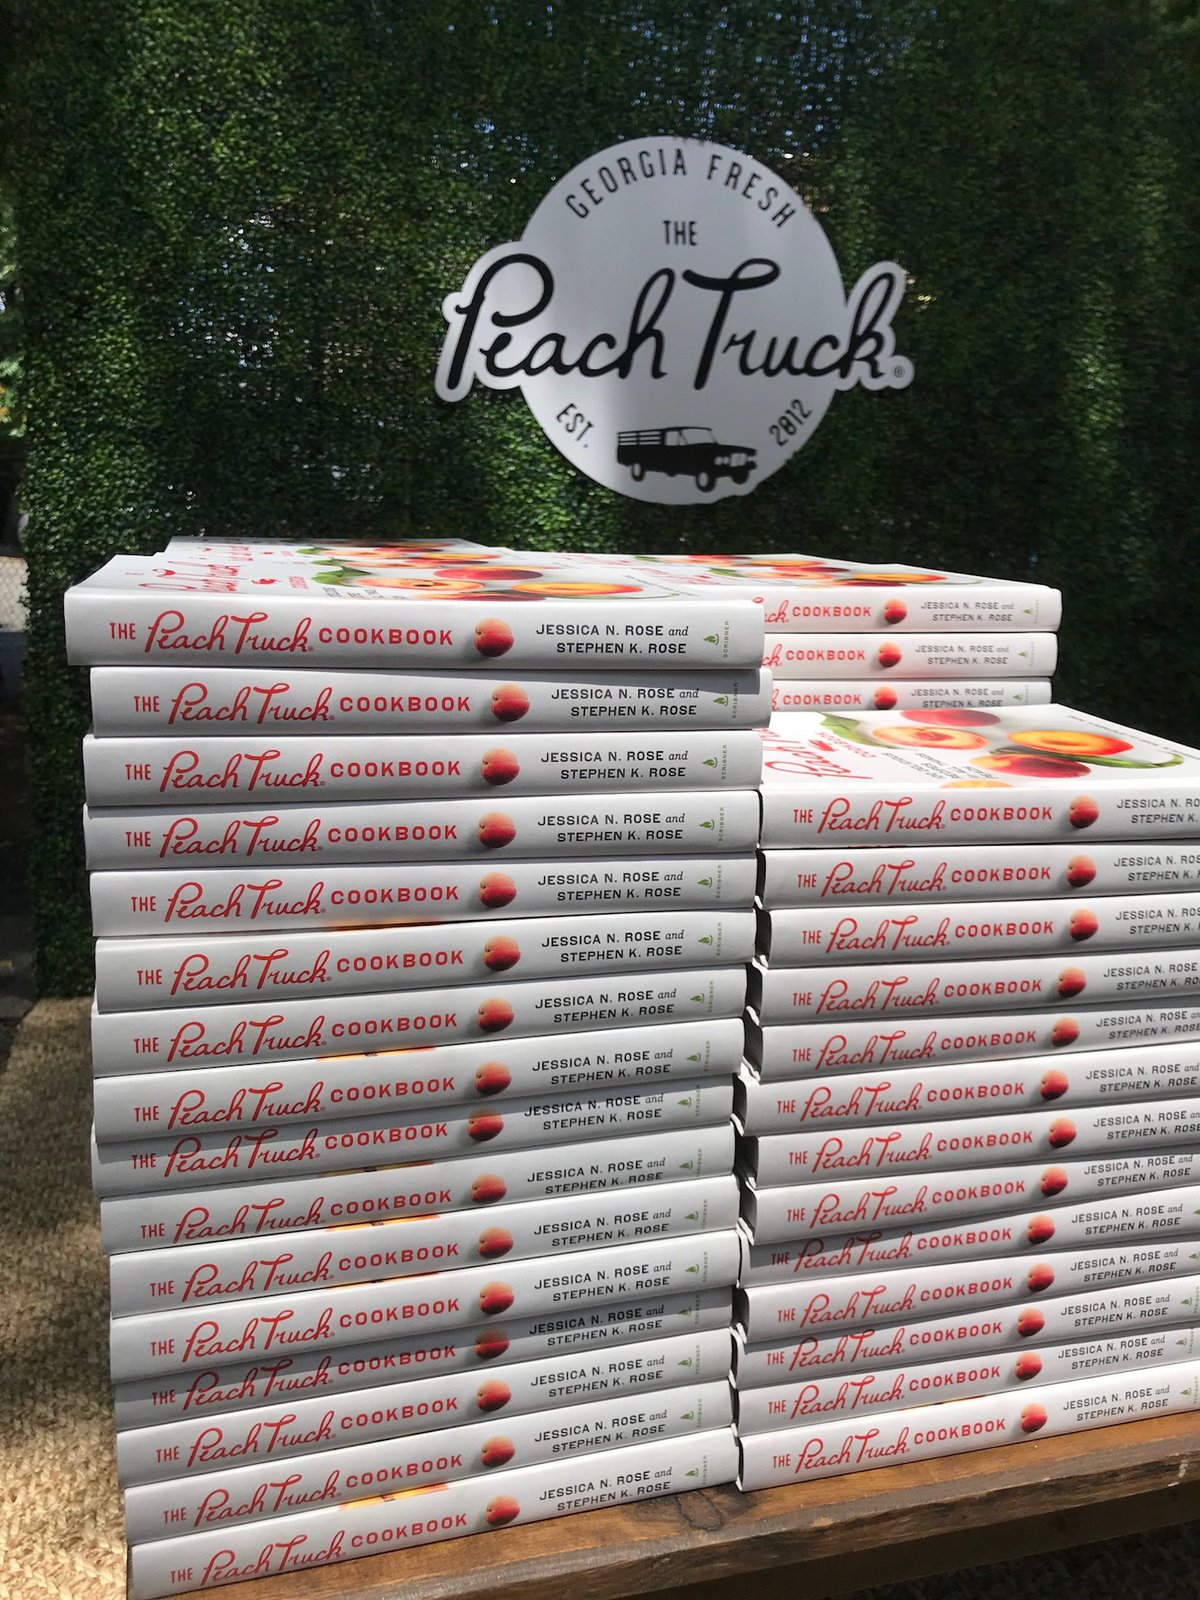 Owners of The Peach Truck Release New Cookbook Nashville Lifestyles